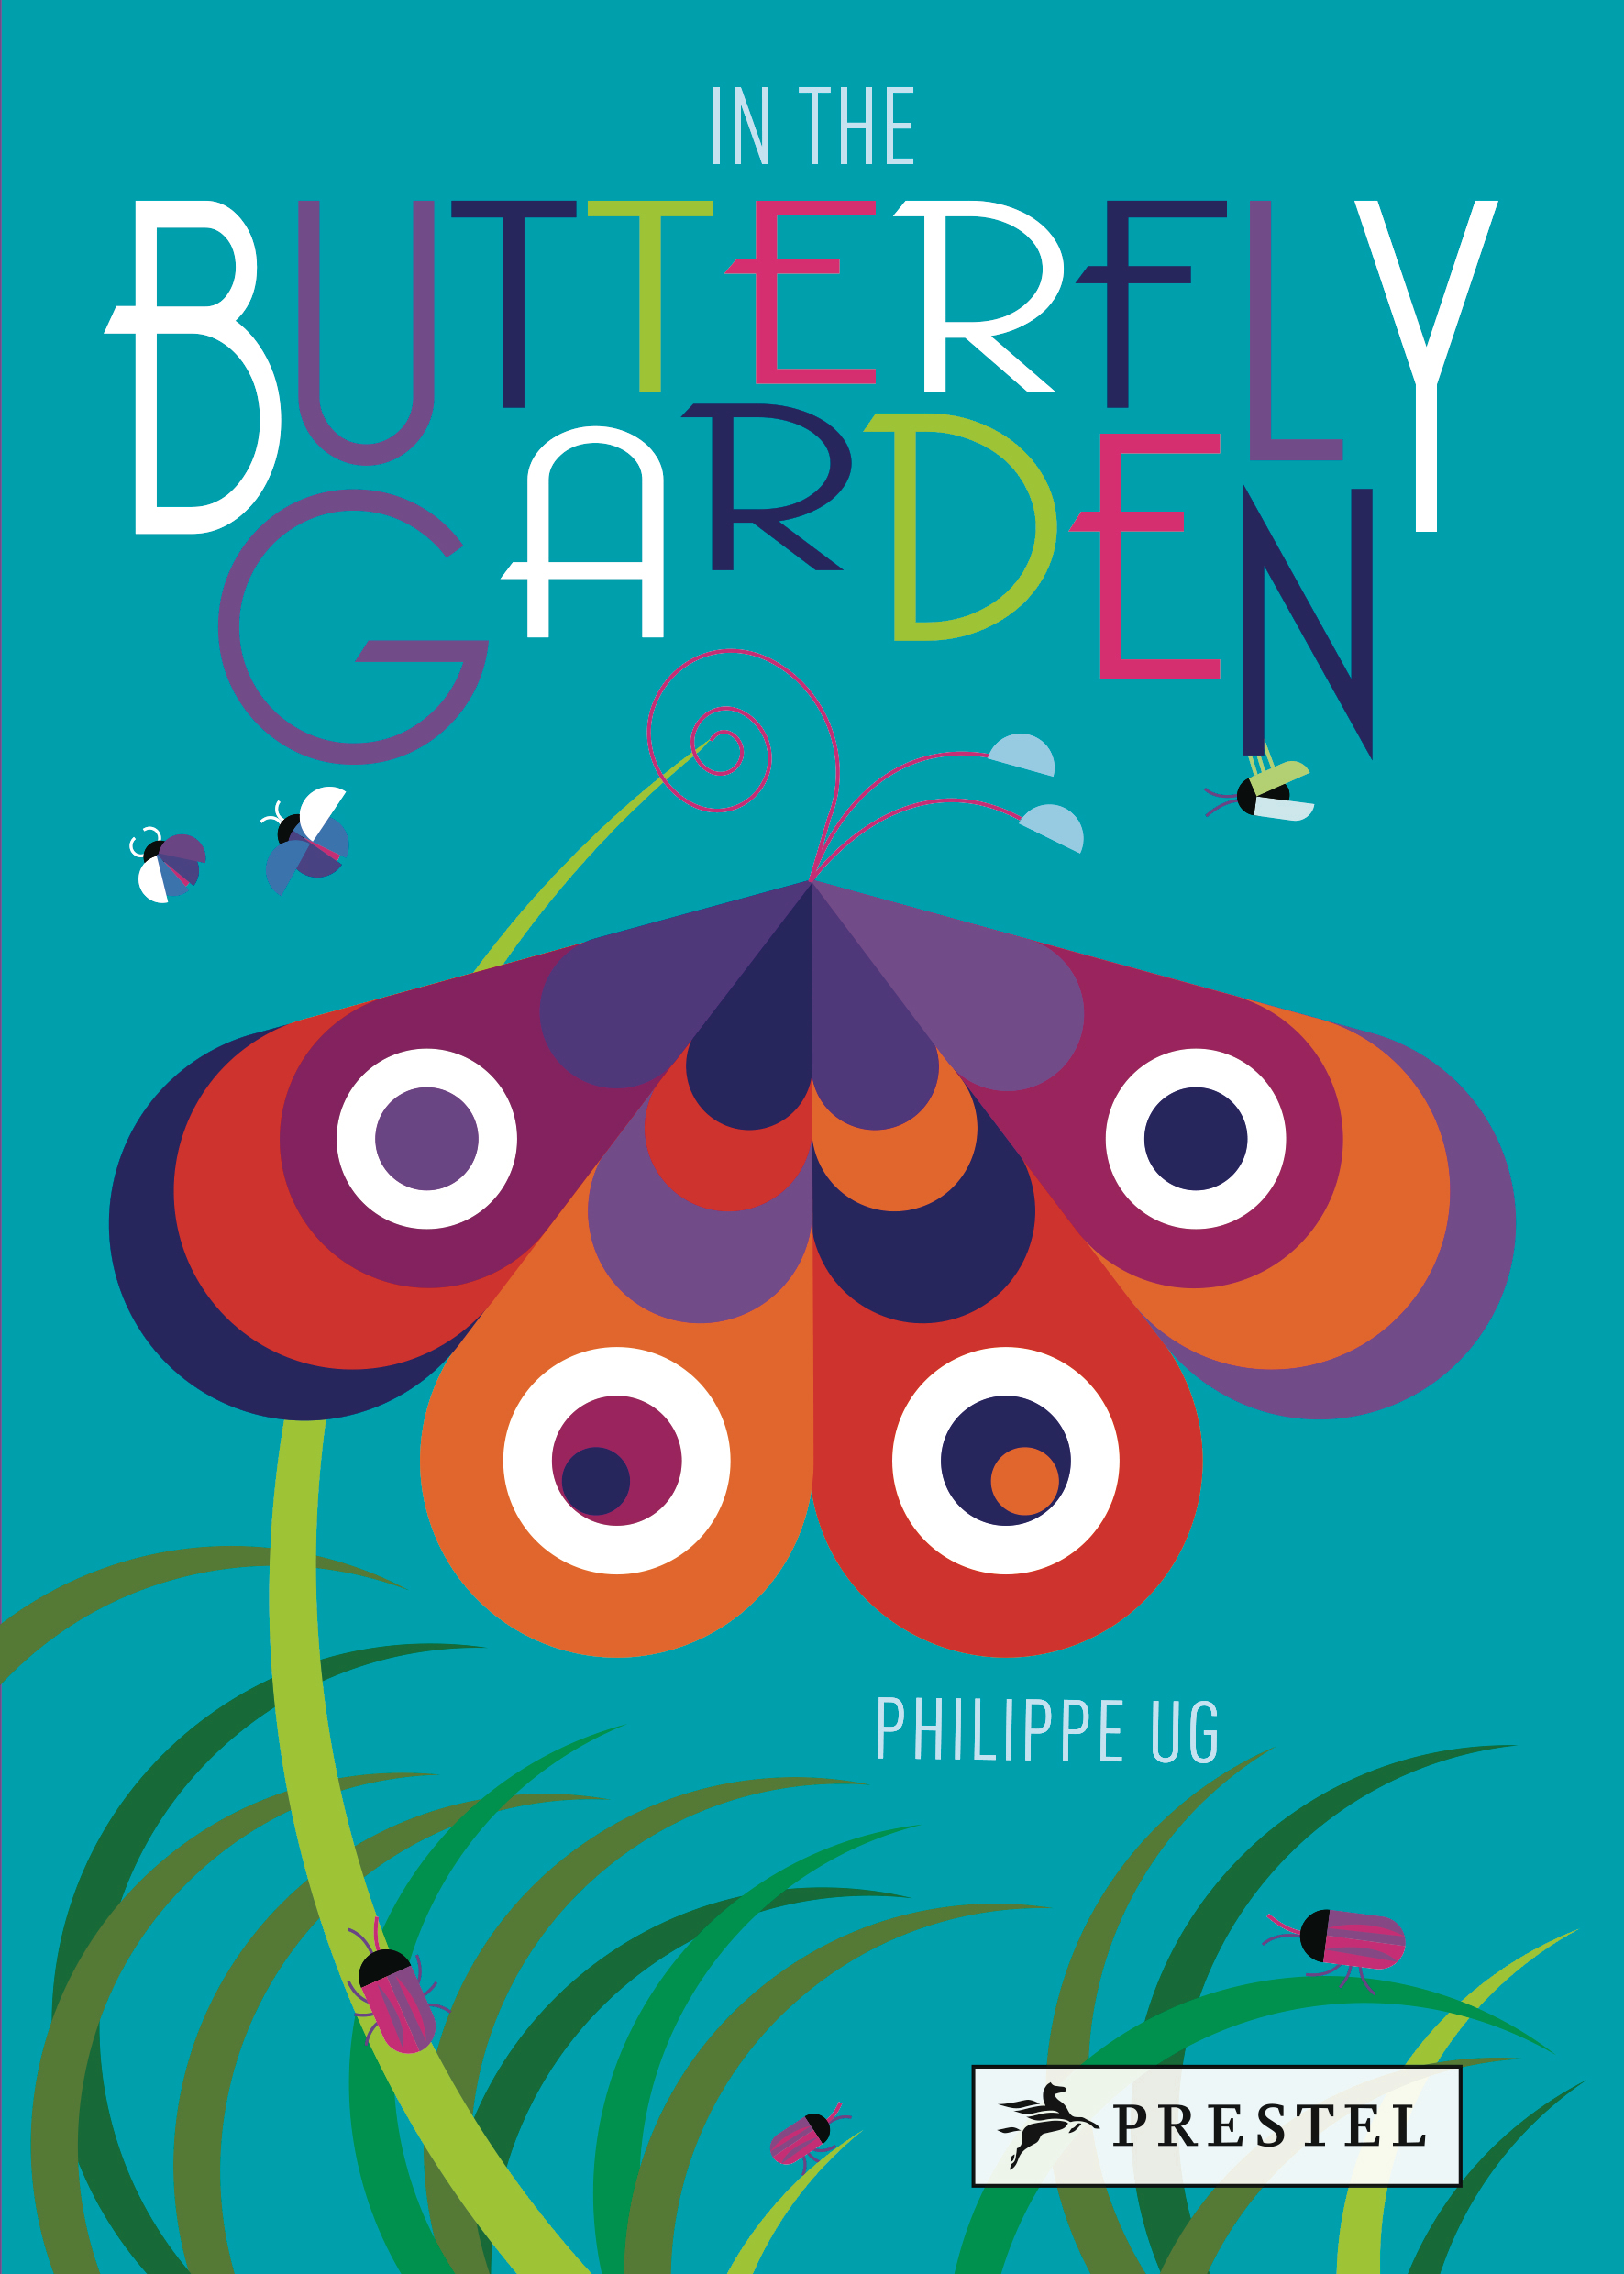 Prestel　Philippe　Garden.　UG:　the　In　Butterfly　Publishing　(Hardcover)